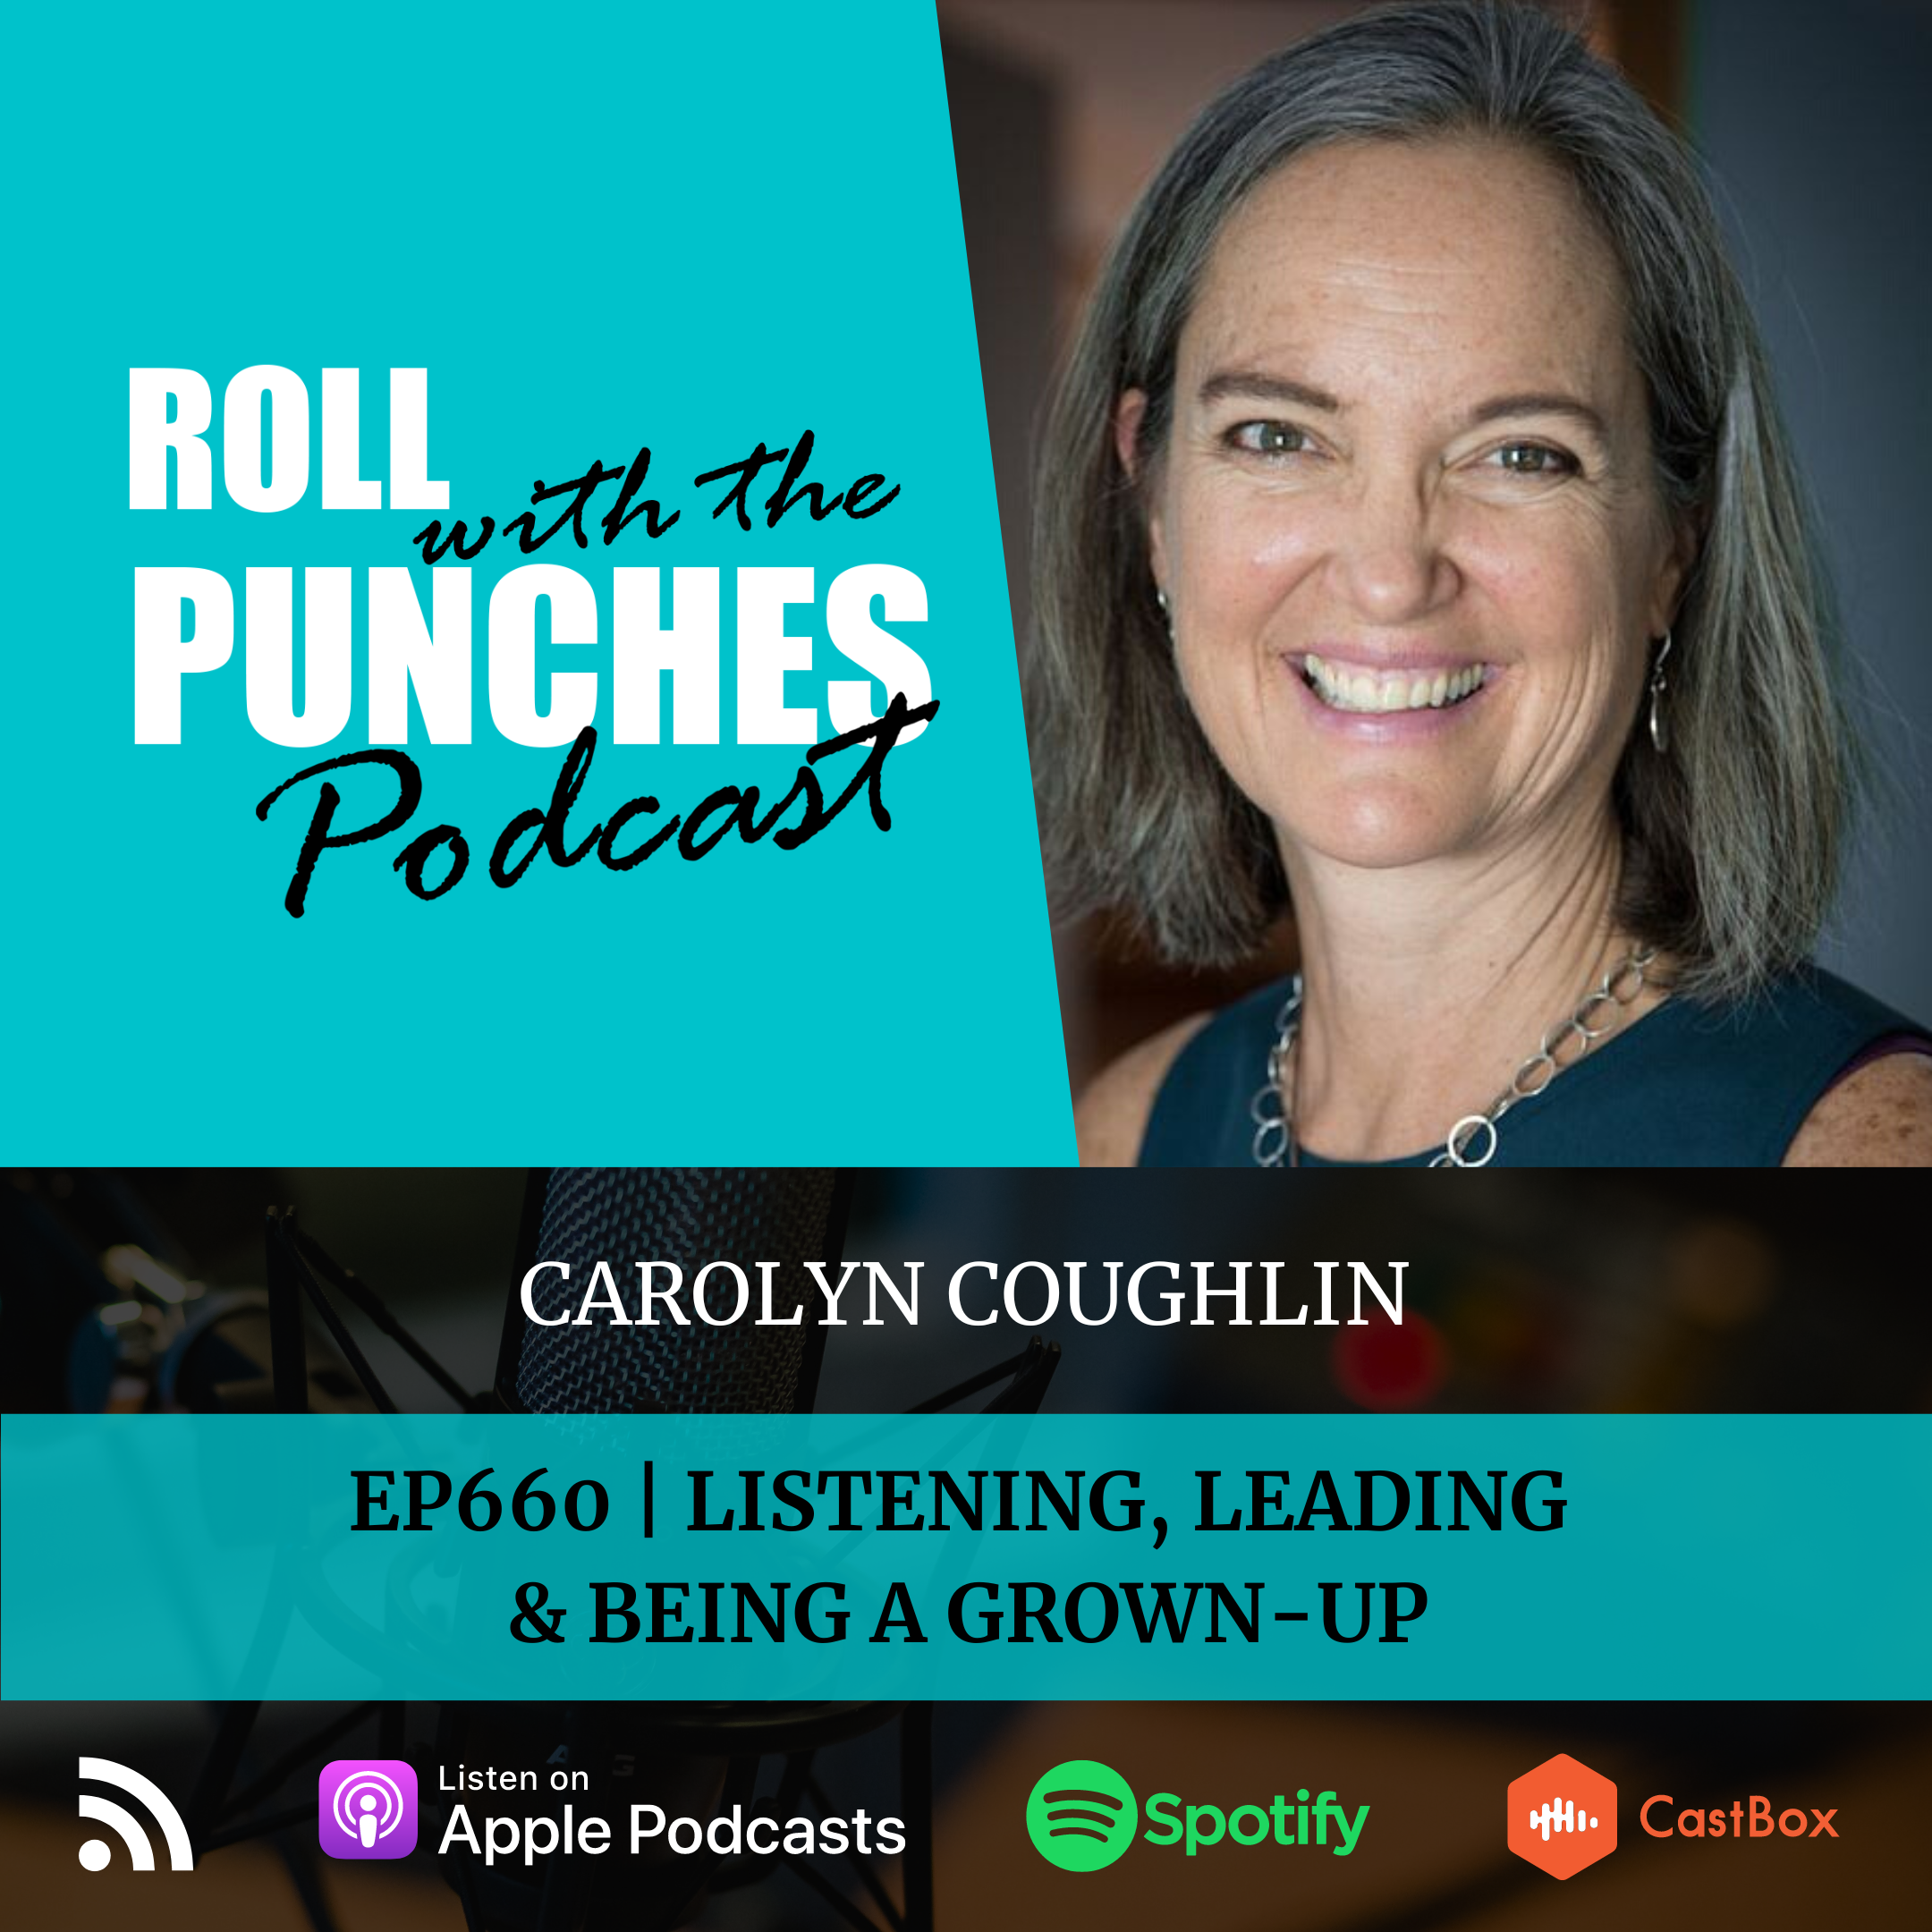 Listening, Leading & Being A Grown-Up | Carolyn Coughlin - 660